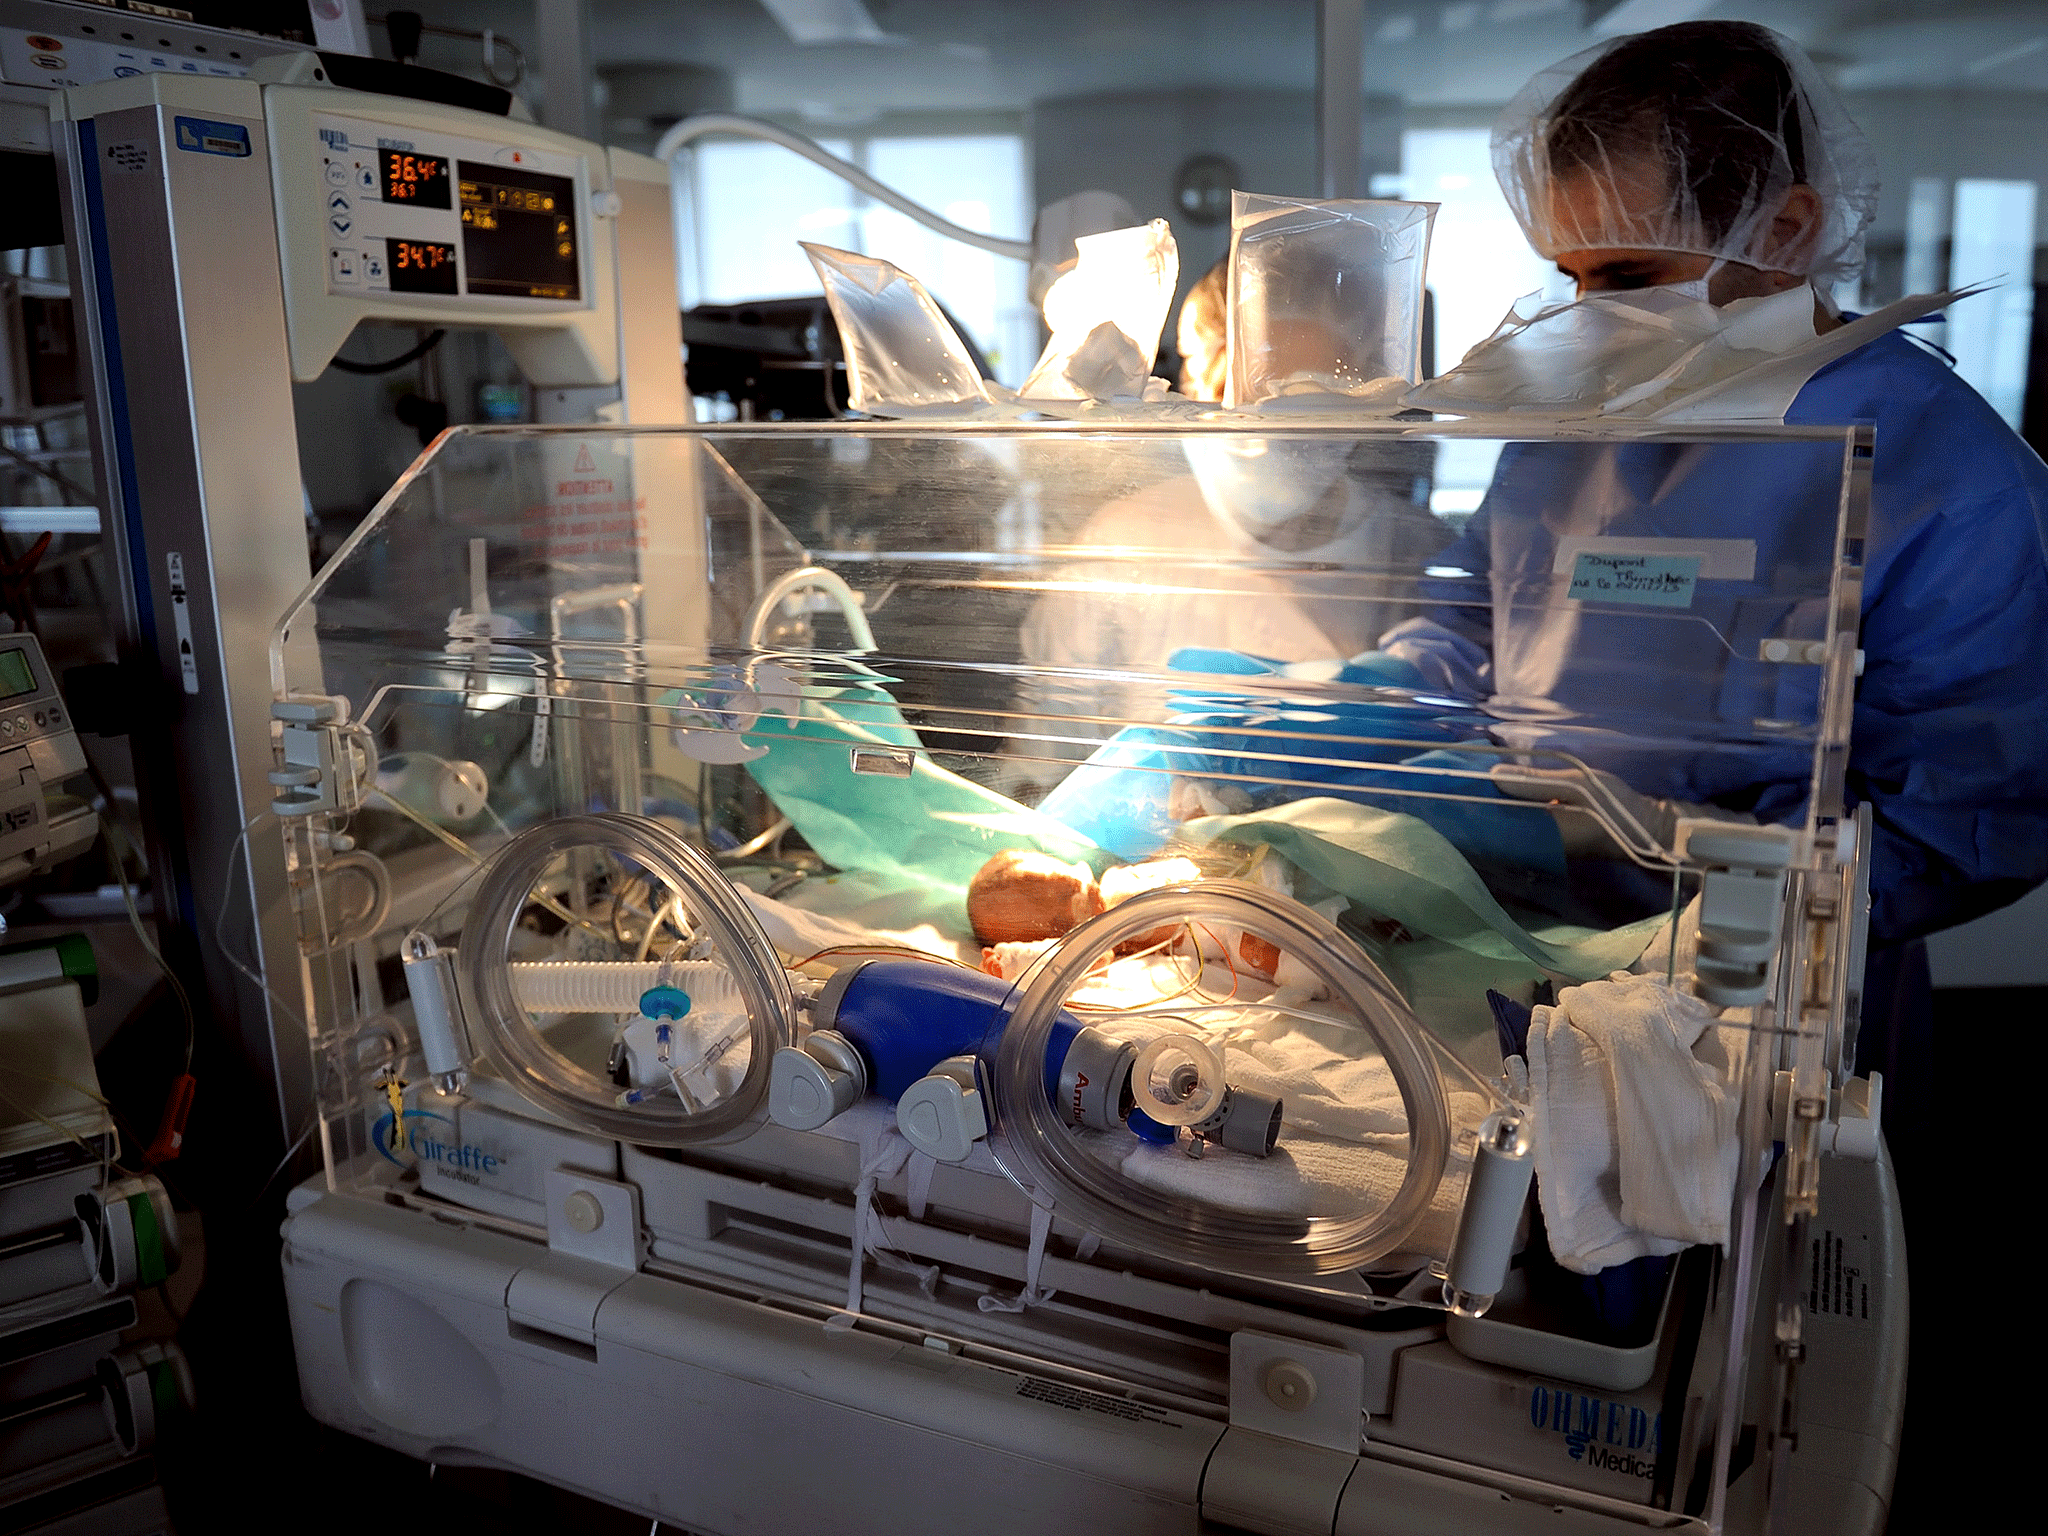 A premature baby is treated in an intensive care unit